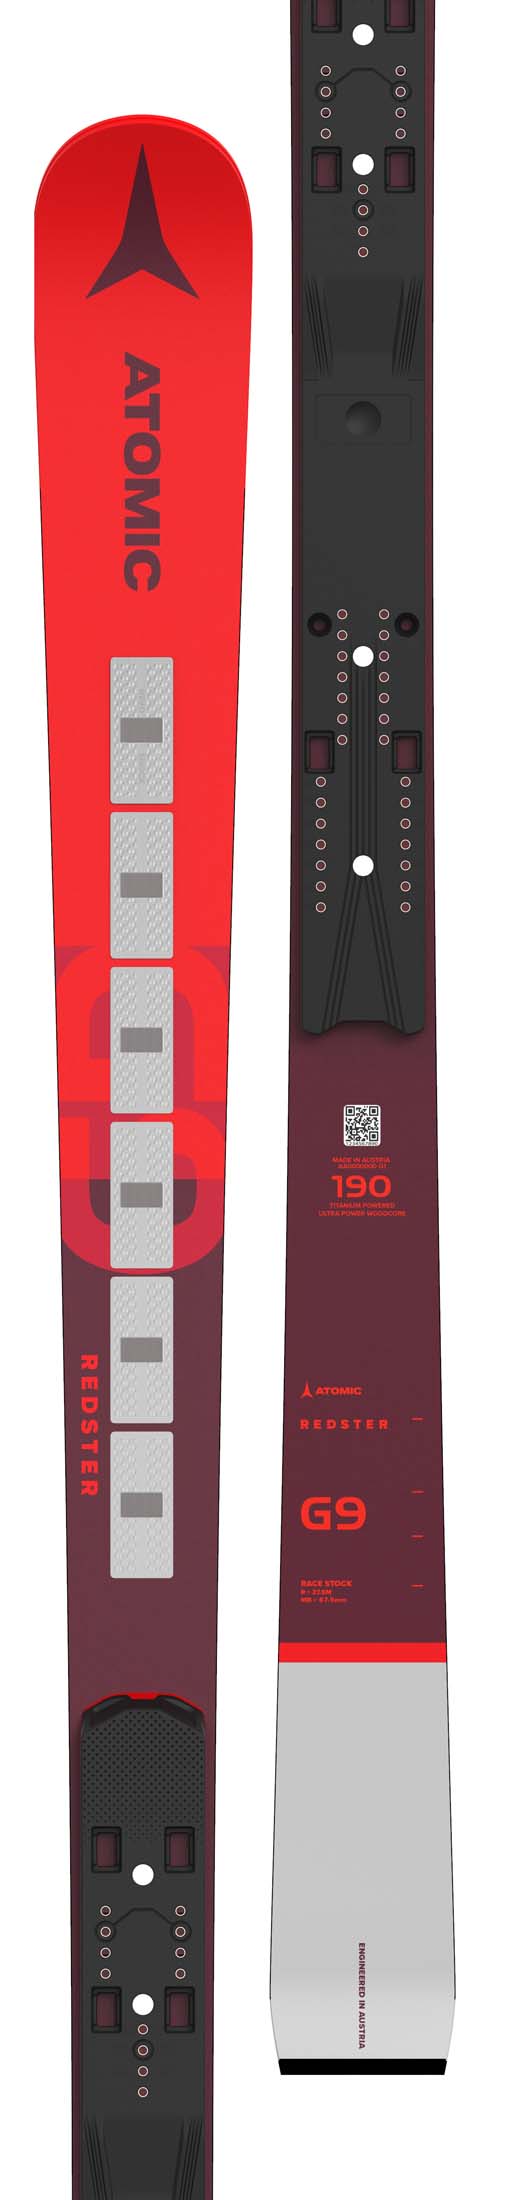 Atomic 2023 Redster G9 RS Revoshock Skis w/ Icon Plate NEW !! 190cm